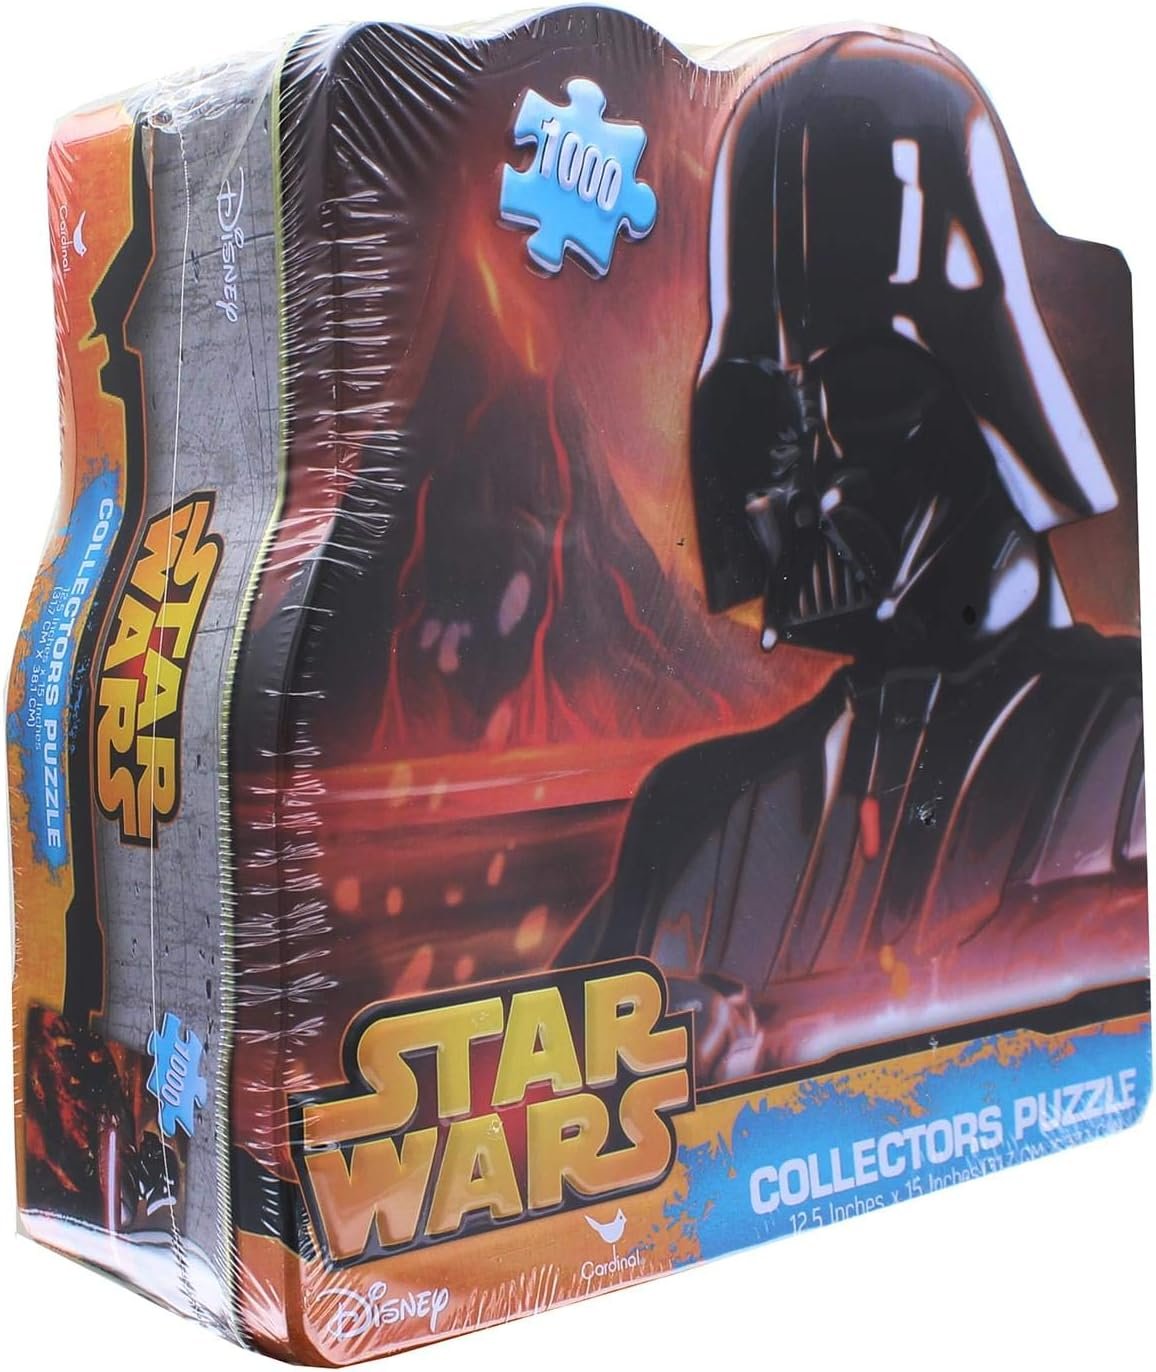 Star Wars Episode 7 Collectors Puzzle with Tin - image 3 of 3